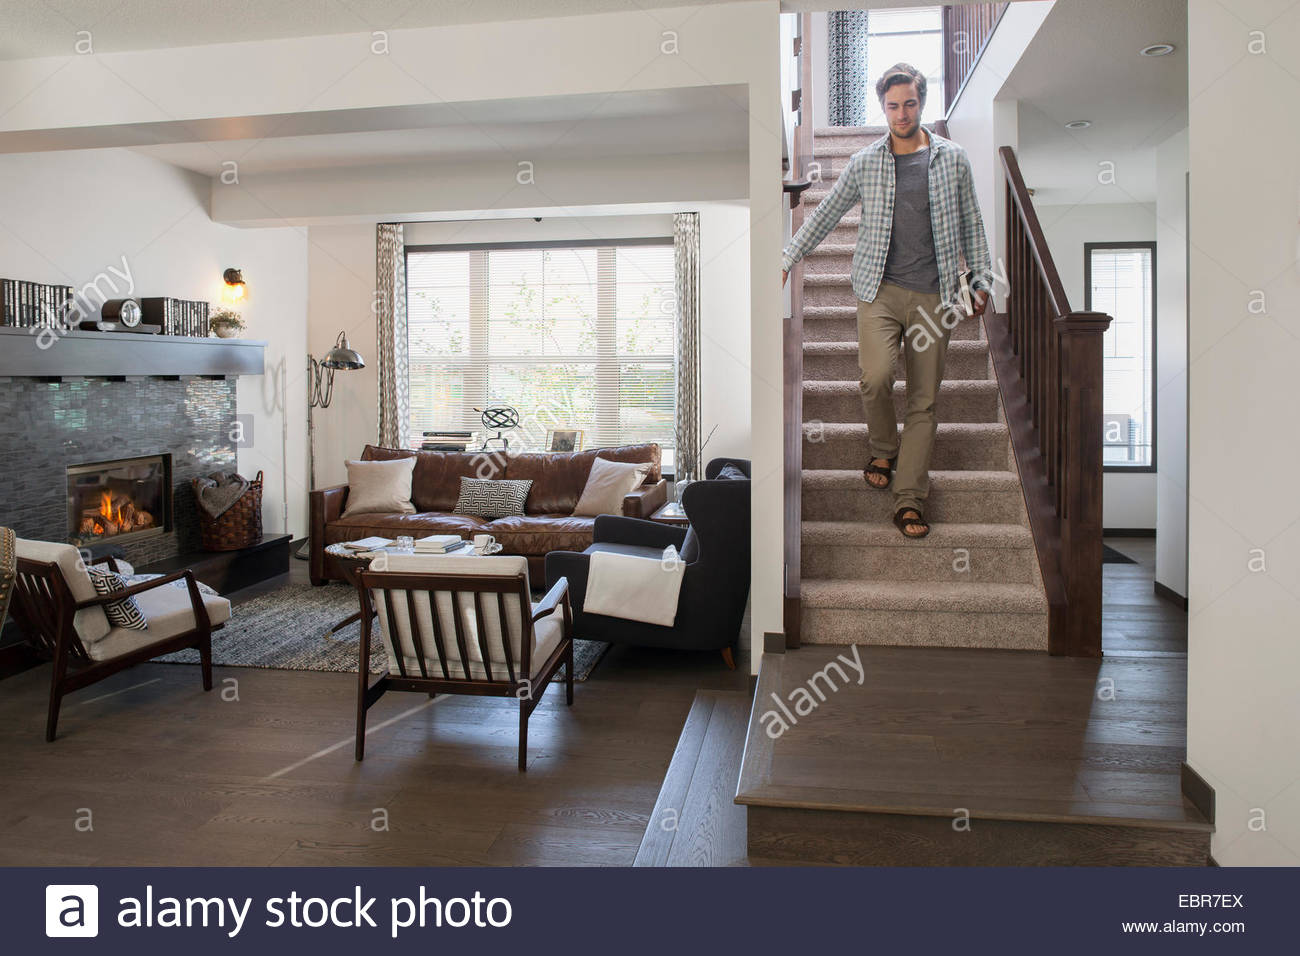 Man descending staircase in house Stock Photo